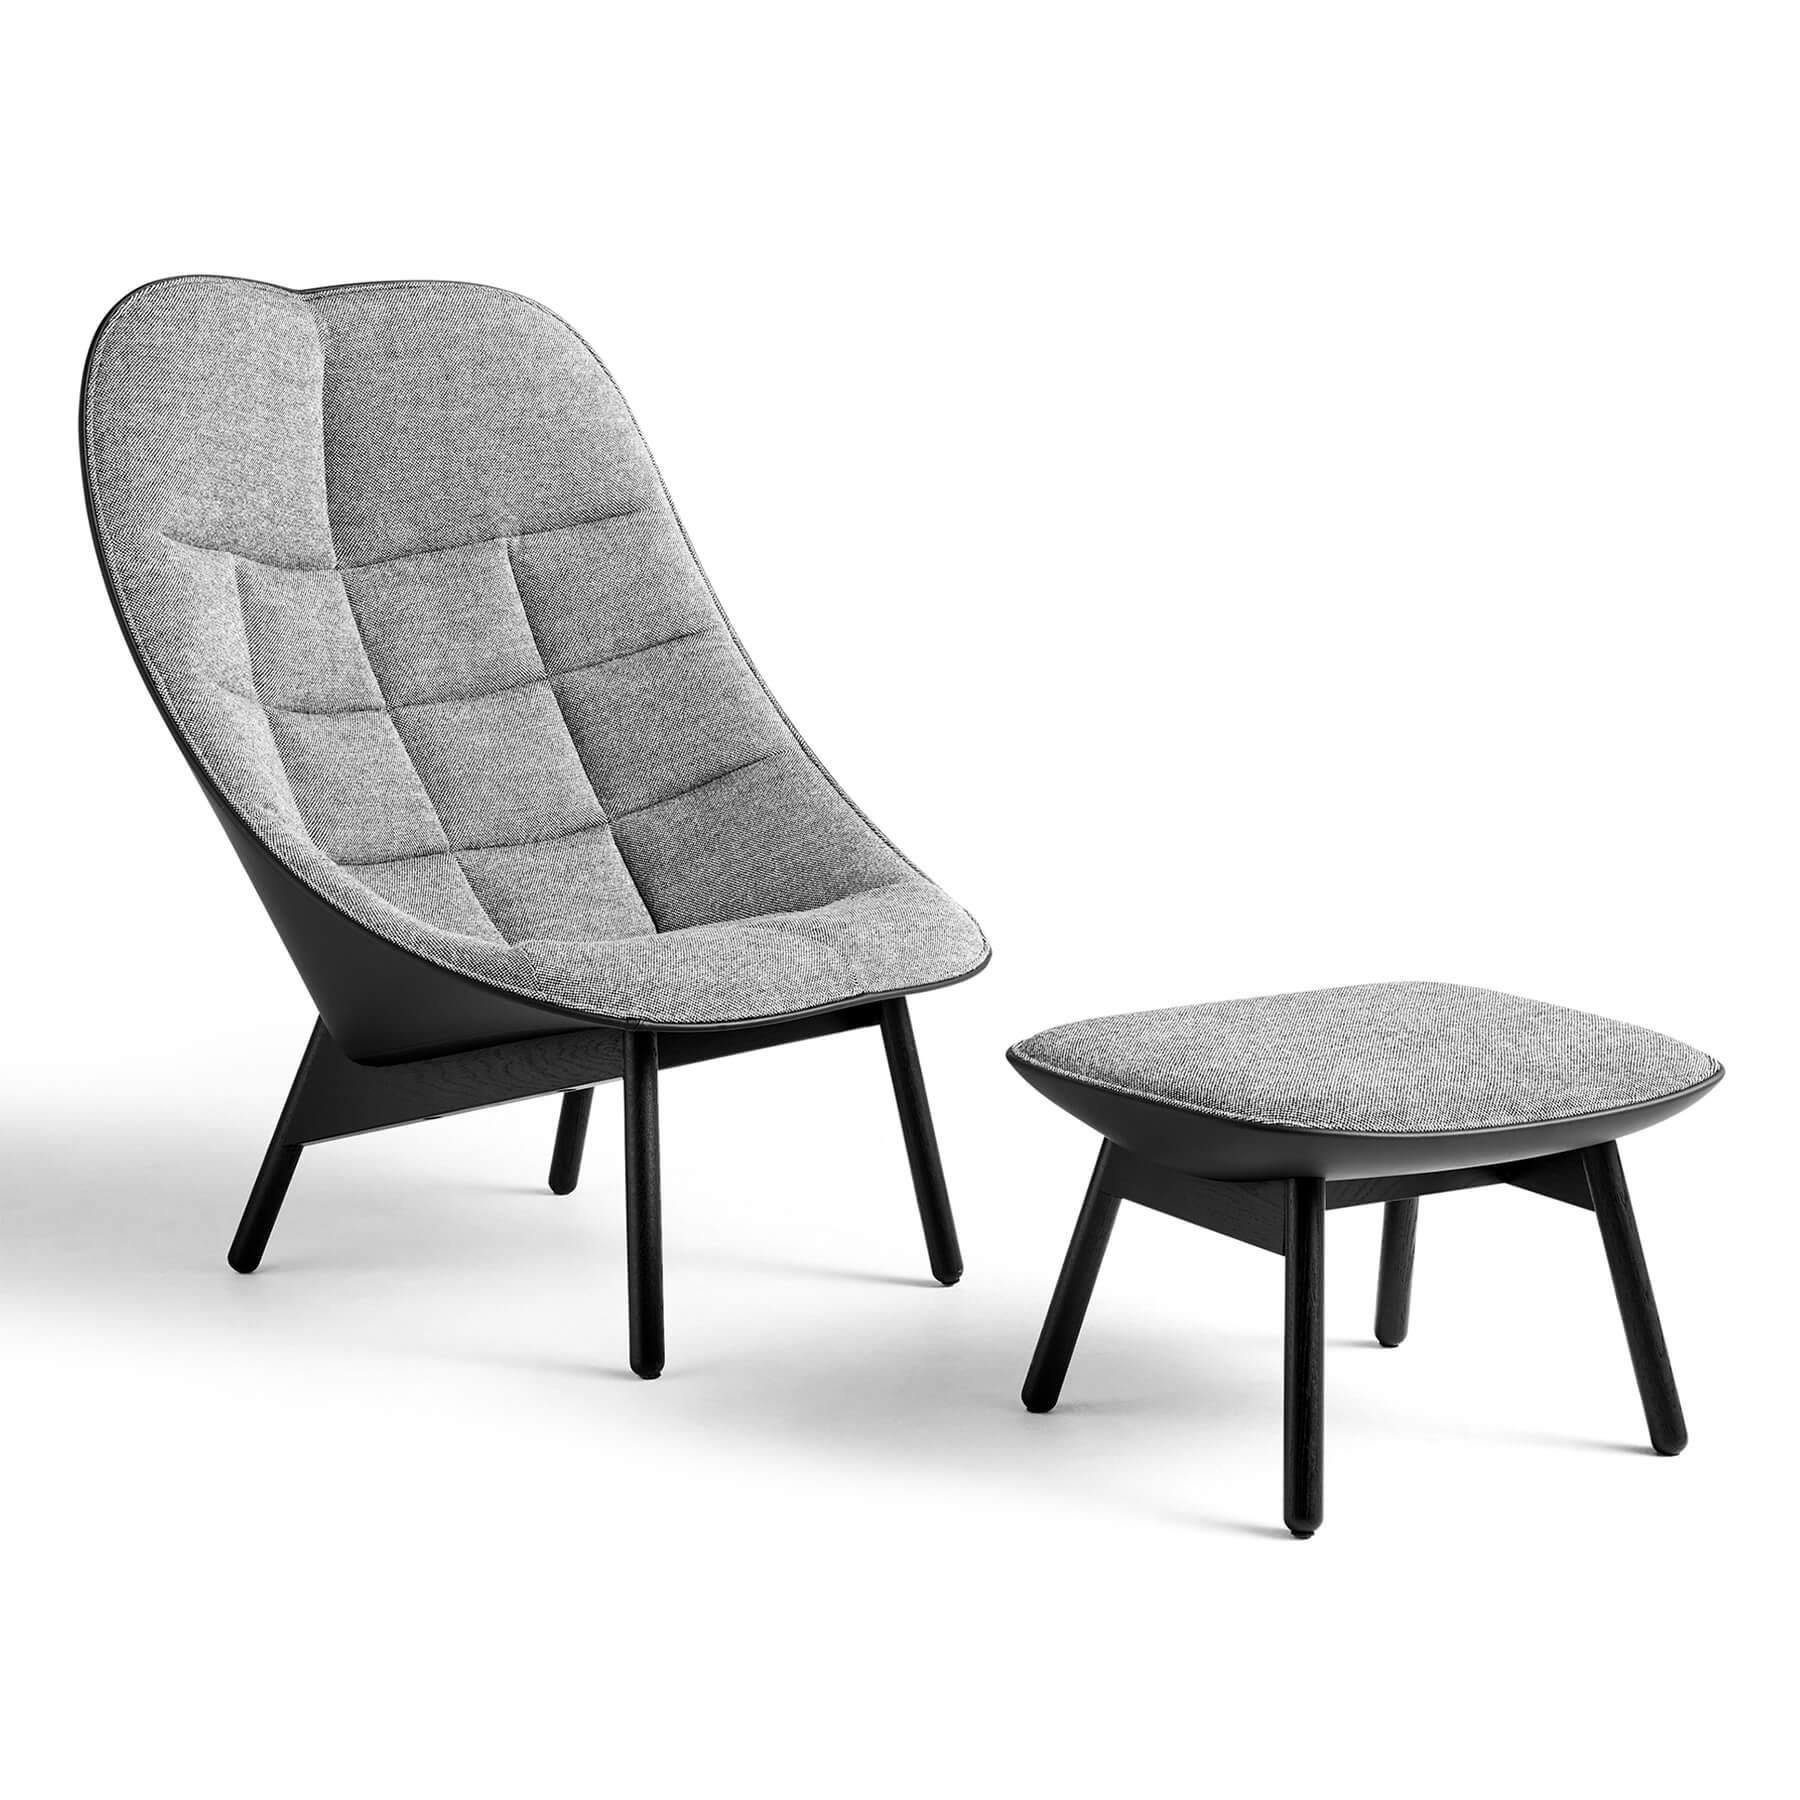 Hay Uchiwa Lounge Chair Quilted Hallingdal 166 Sierra Si1001 Black Oak Base With Ottoman Grey Designer Furniture From Holloways Of Ludlow